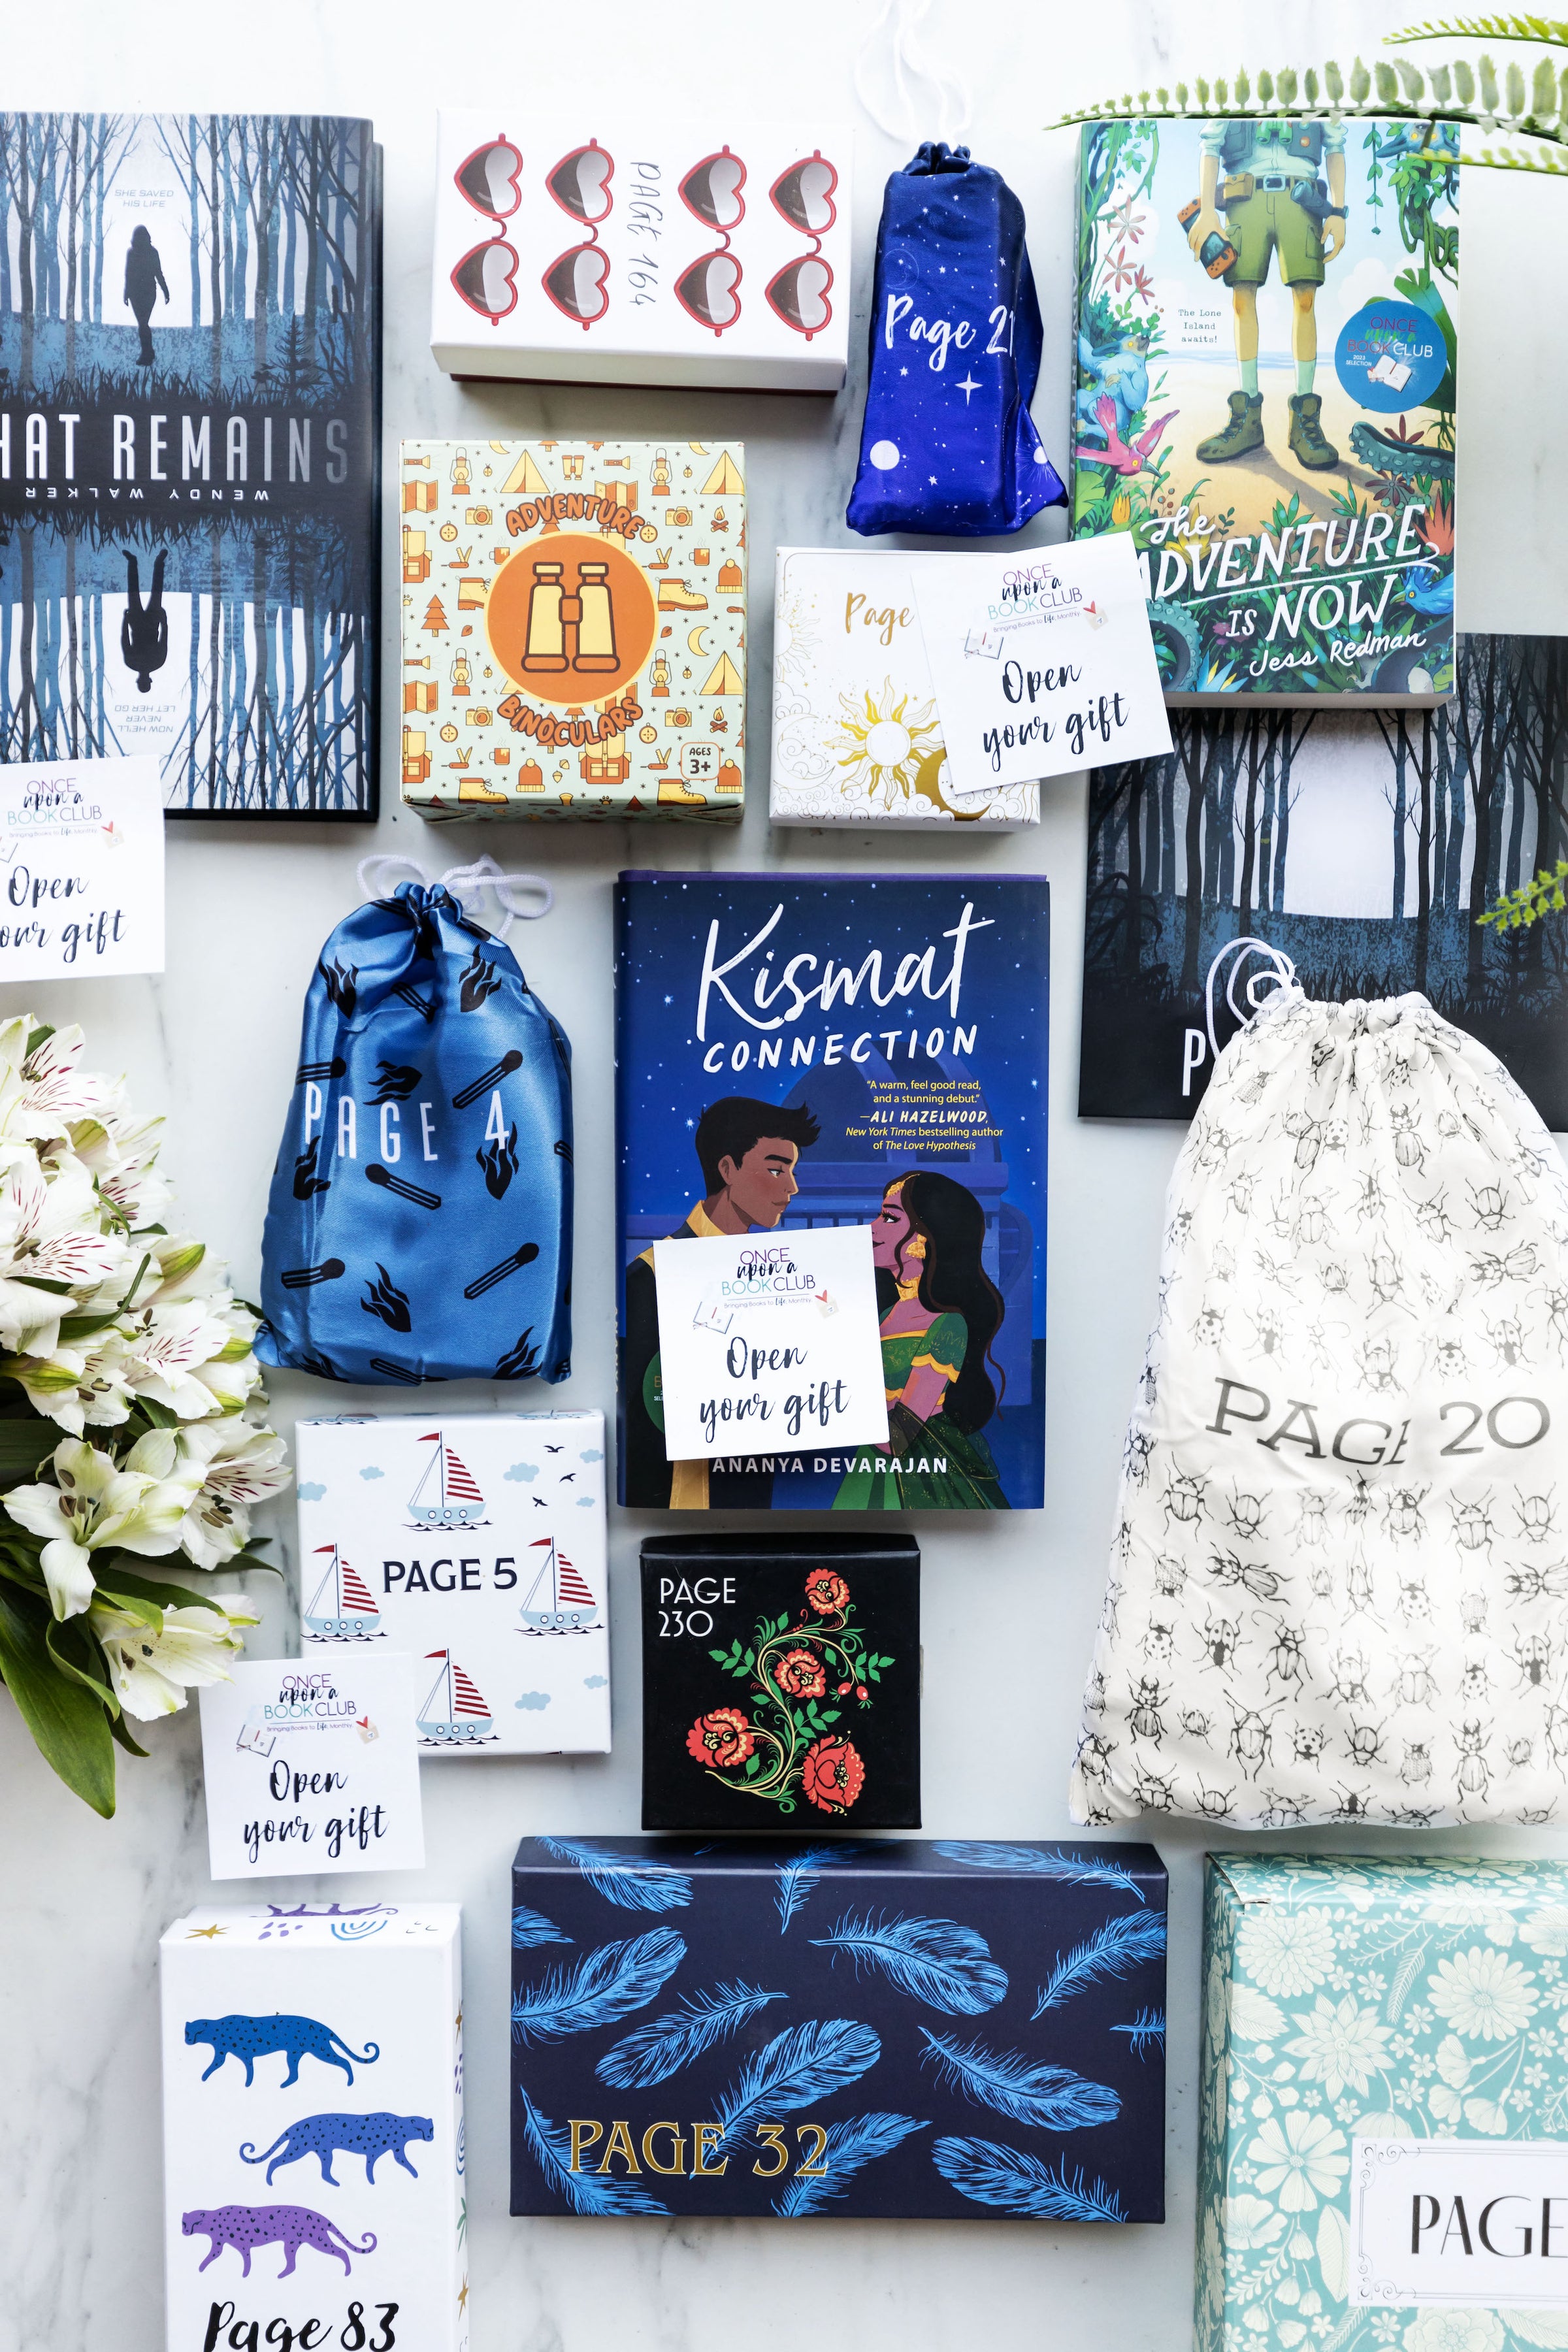 A collection of books and wrapped gifts in a flatlay style. Books include What Remains by Wendy Walker (the exclusive Once Upon a Book Club edition), The Adventure is Now by Jess Redman, and The Kismat Connection by Ananya Devarajan. Flowers are on the left side of the image. Gift bags are all labeled with various page numbers. There are also Open Your Gift sticky notes scattered around the image.